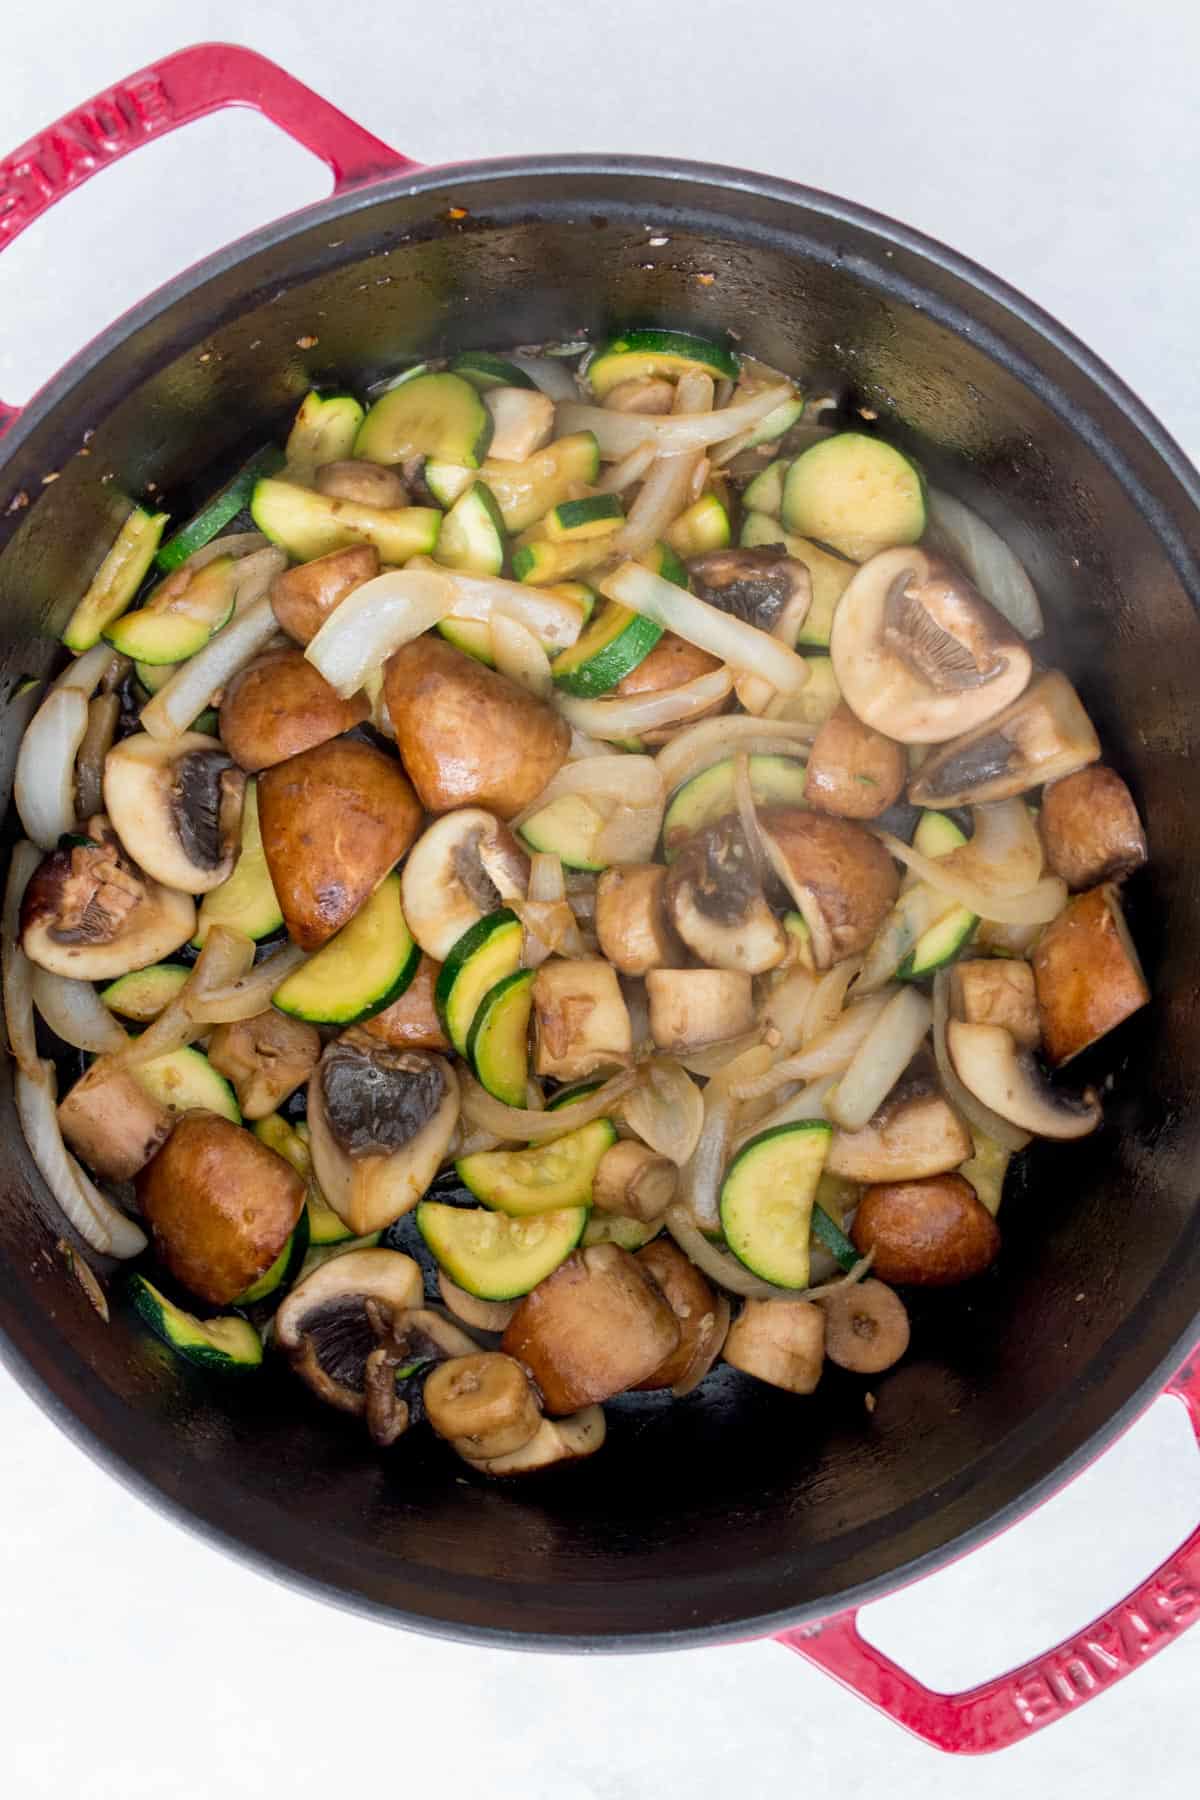 Hibachi vegetables in a dutch oven.